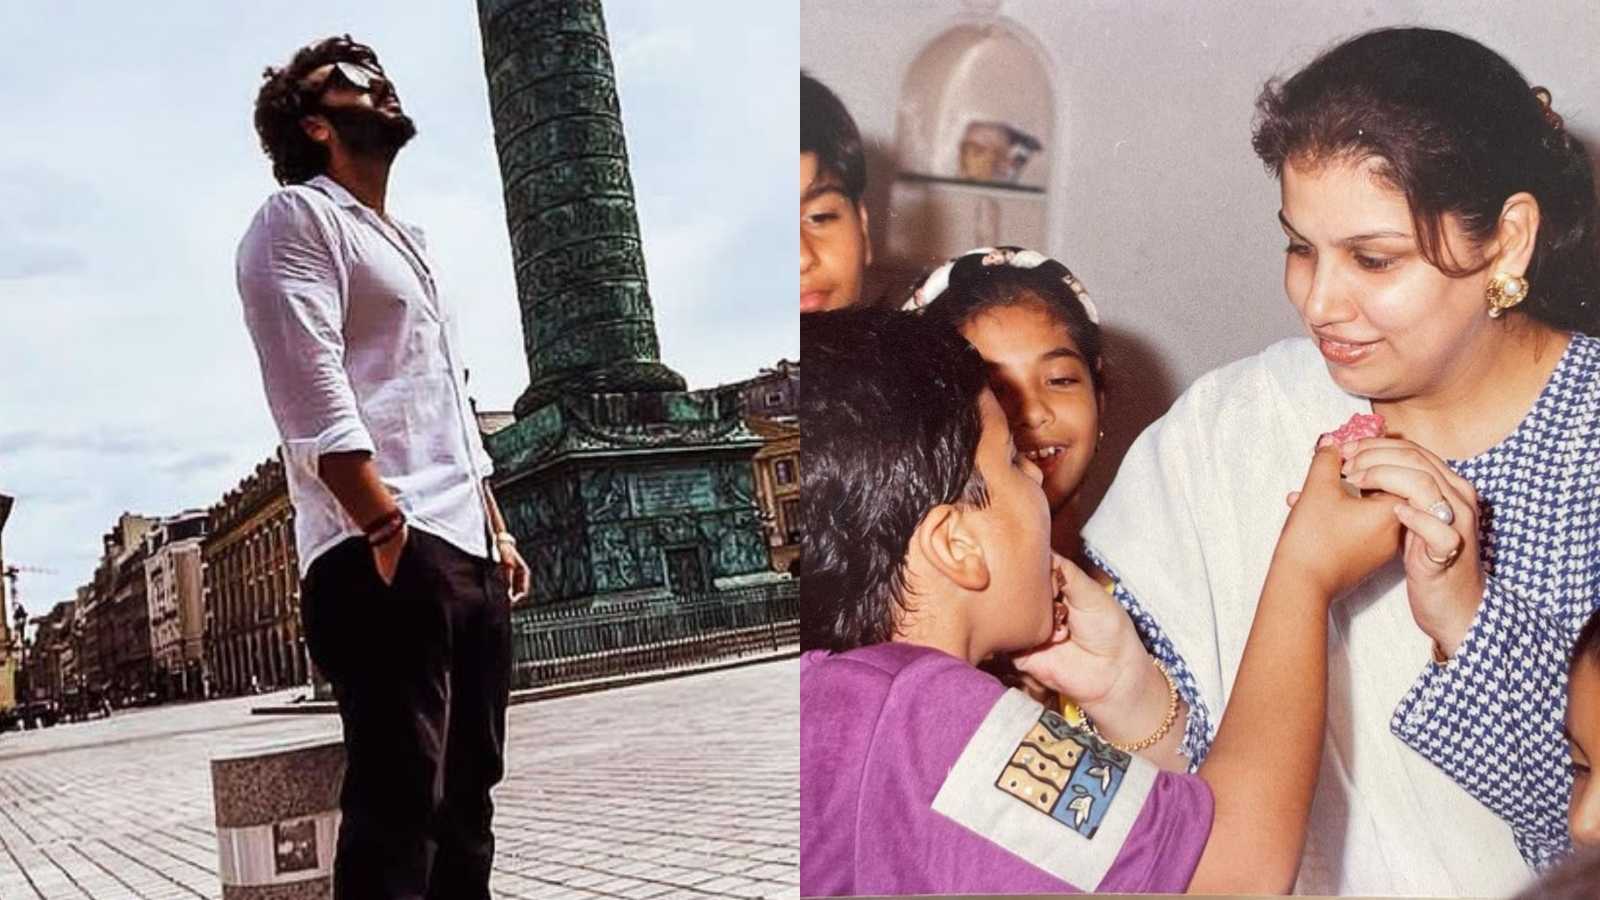 Anushla Kapoor shares pics from childhood birthday celebrations with Arjun Kapoor, actor misses his mom as he turns 37